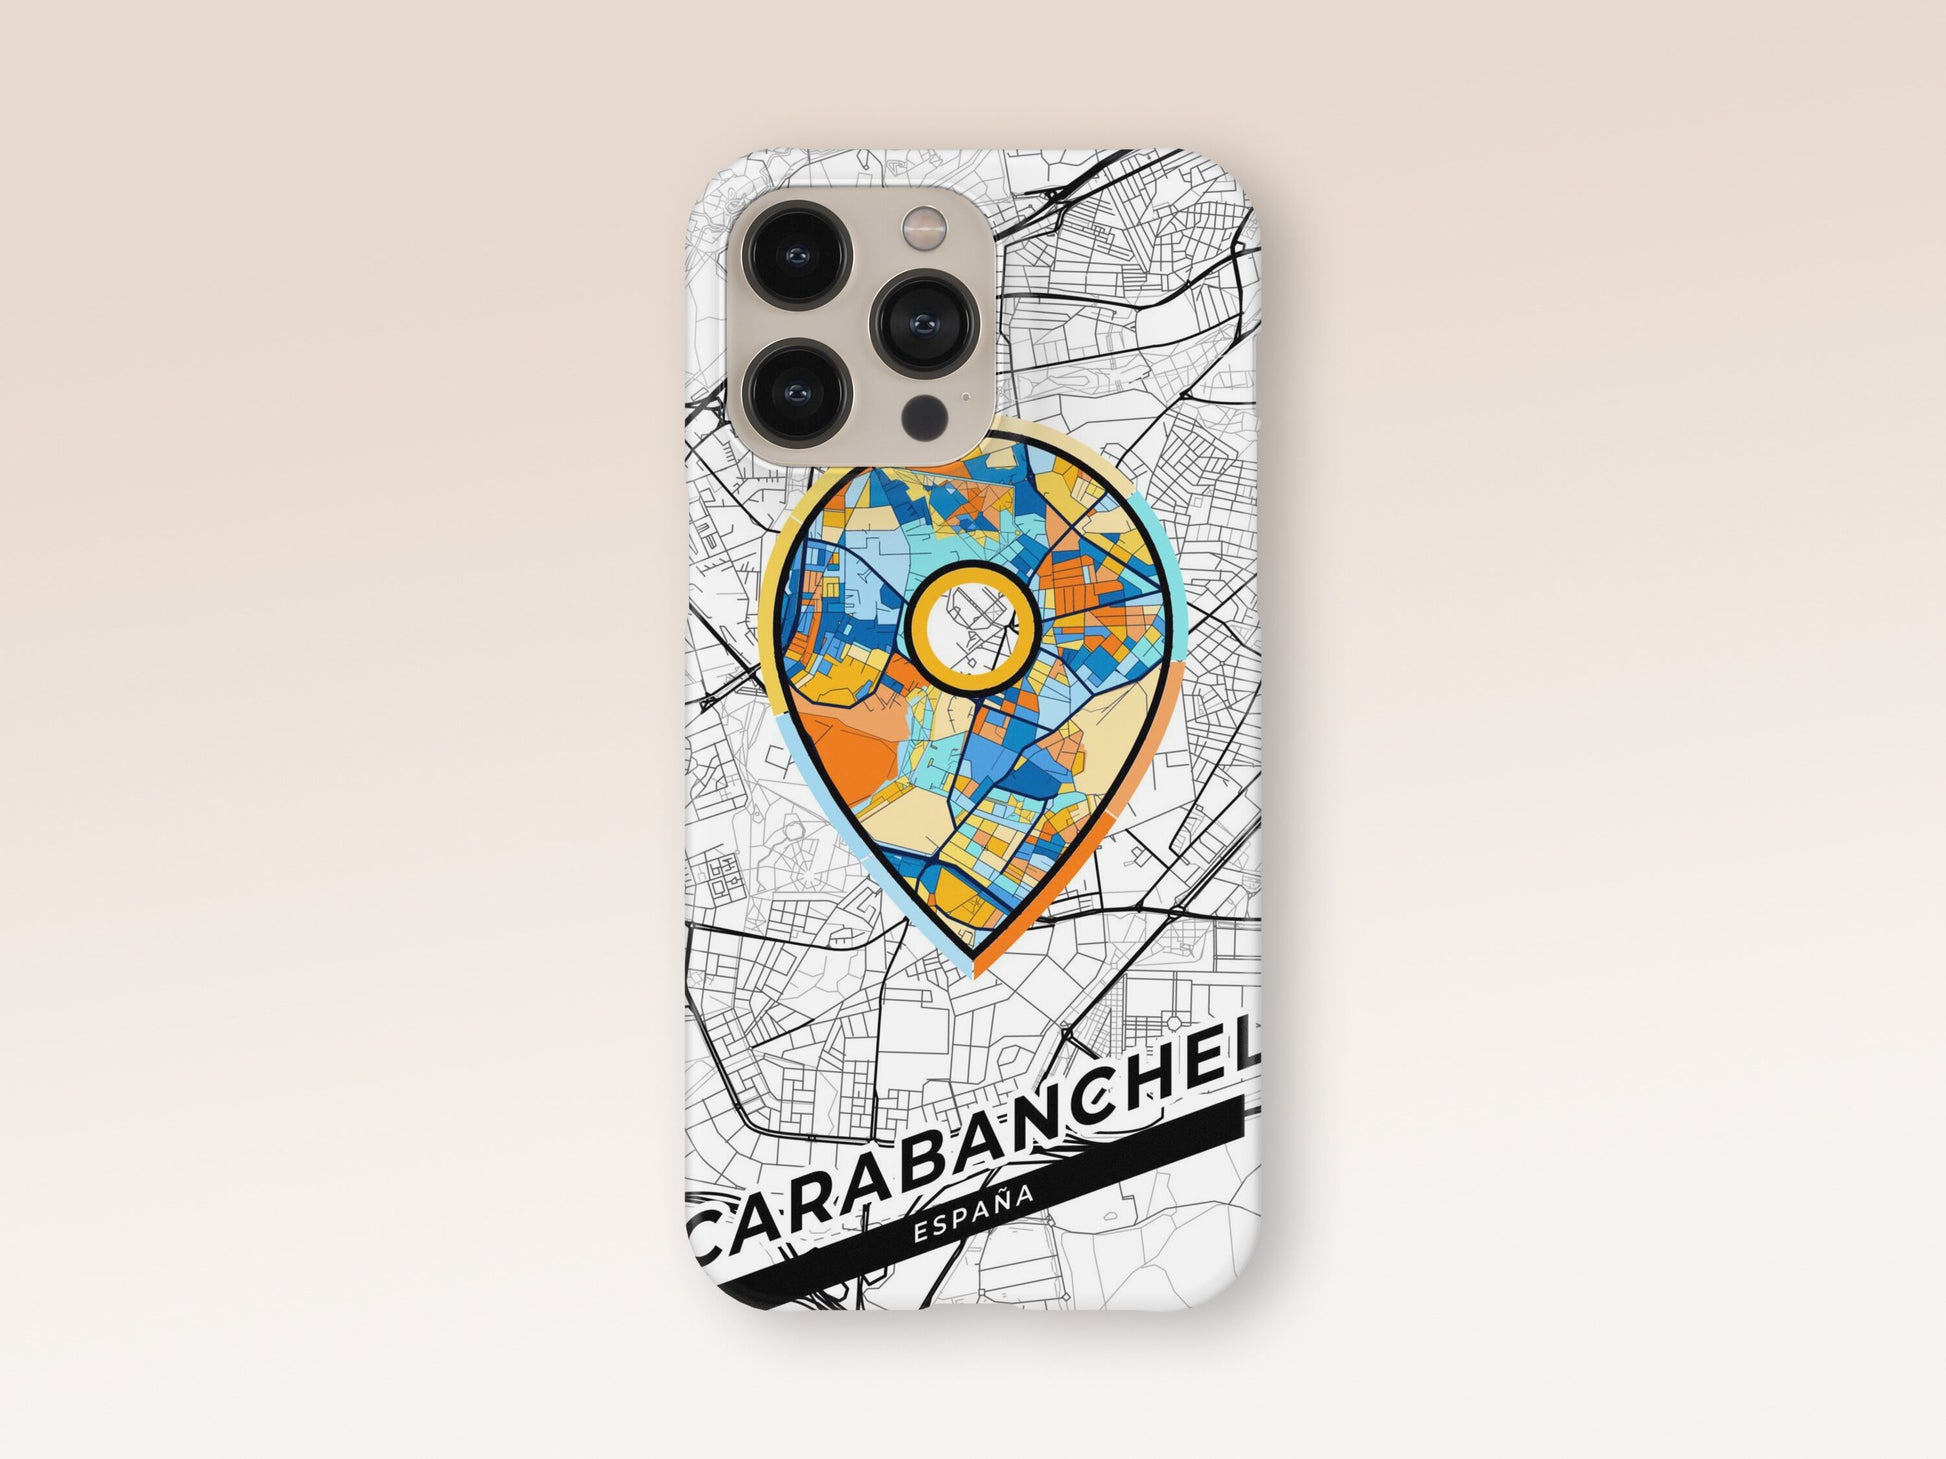 Carabanchel Spain slim phone case with colorful icon. Birthday, wedding or housewarming gift. Couple match cases. 1